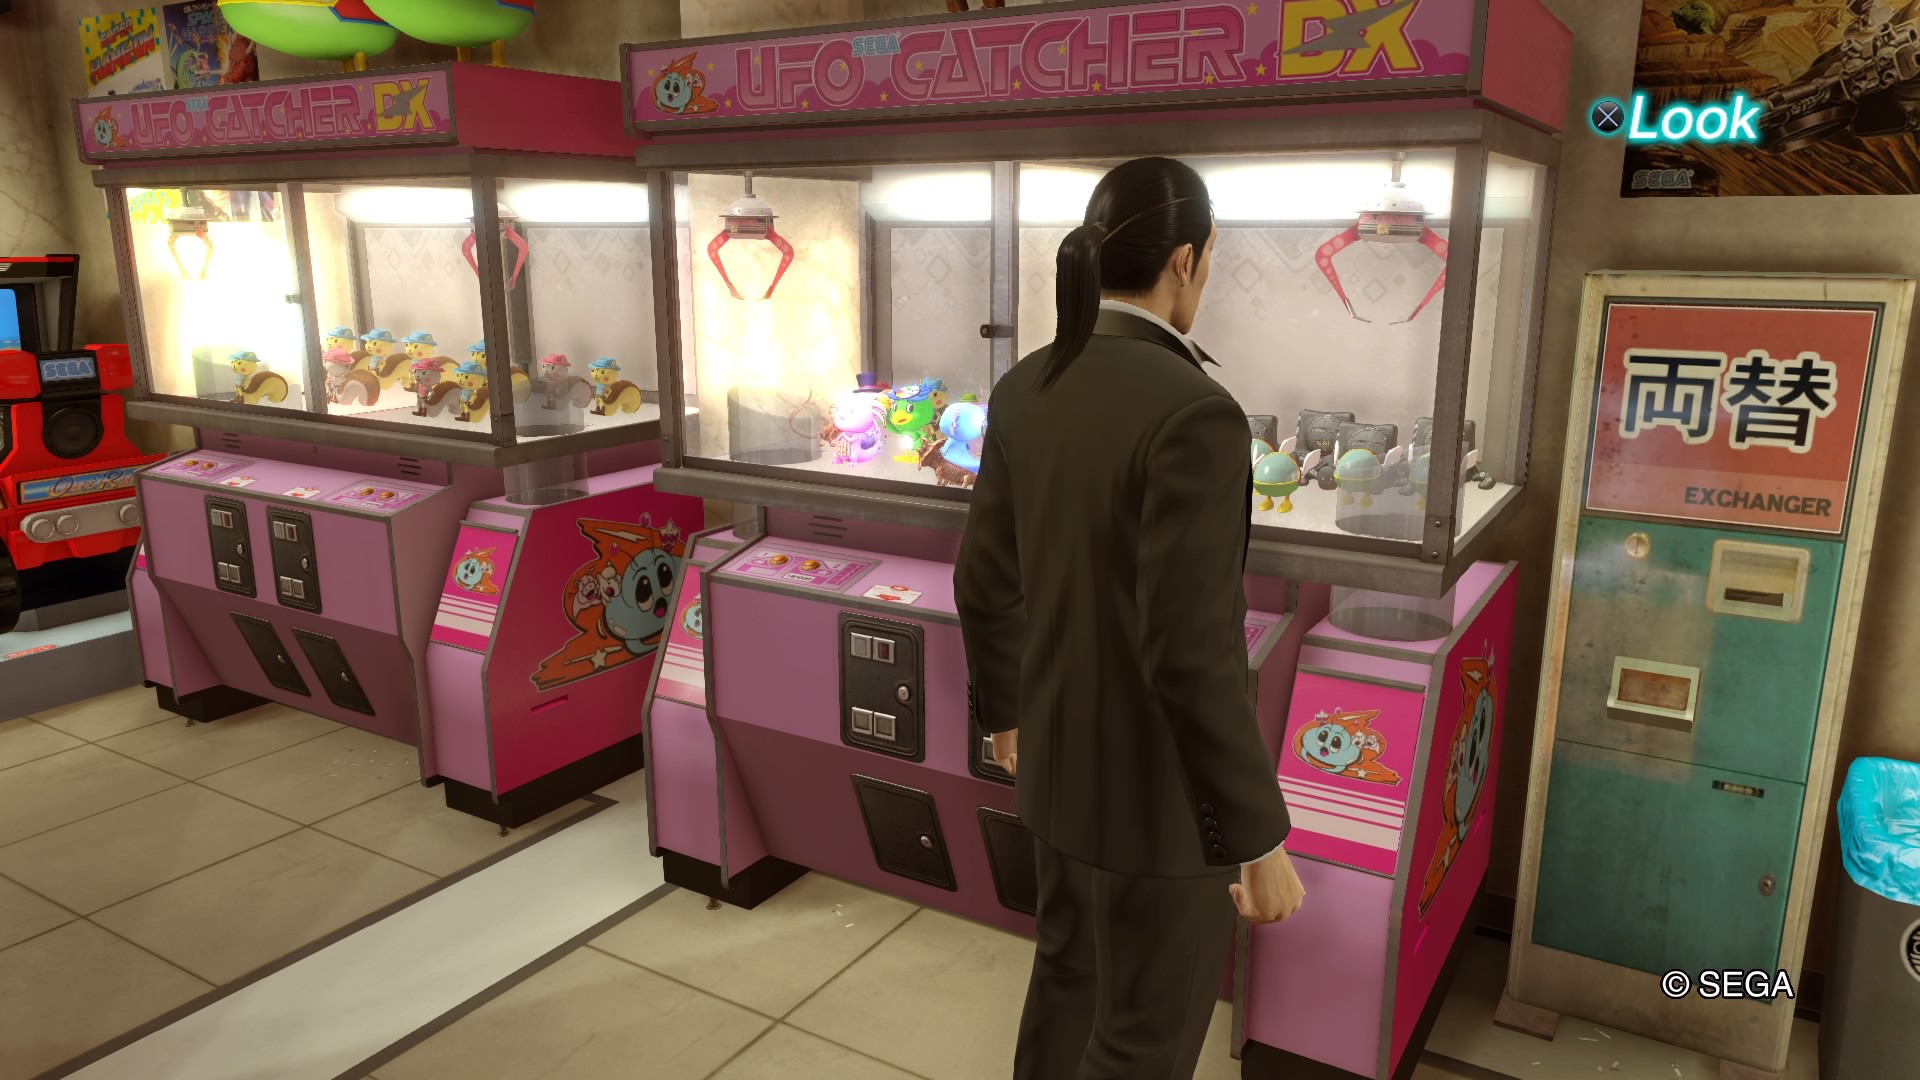 Ironically, this crane game is also UFO themed. (Screenshot: Sega)